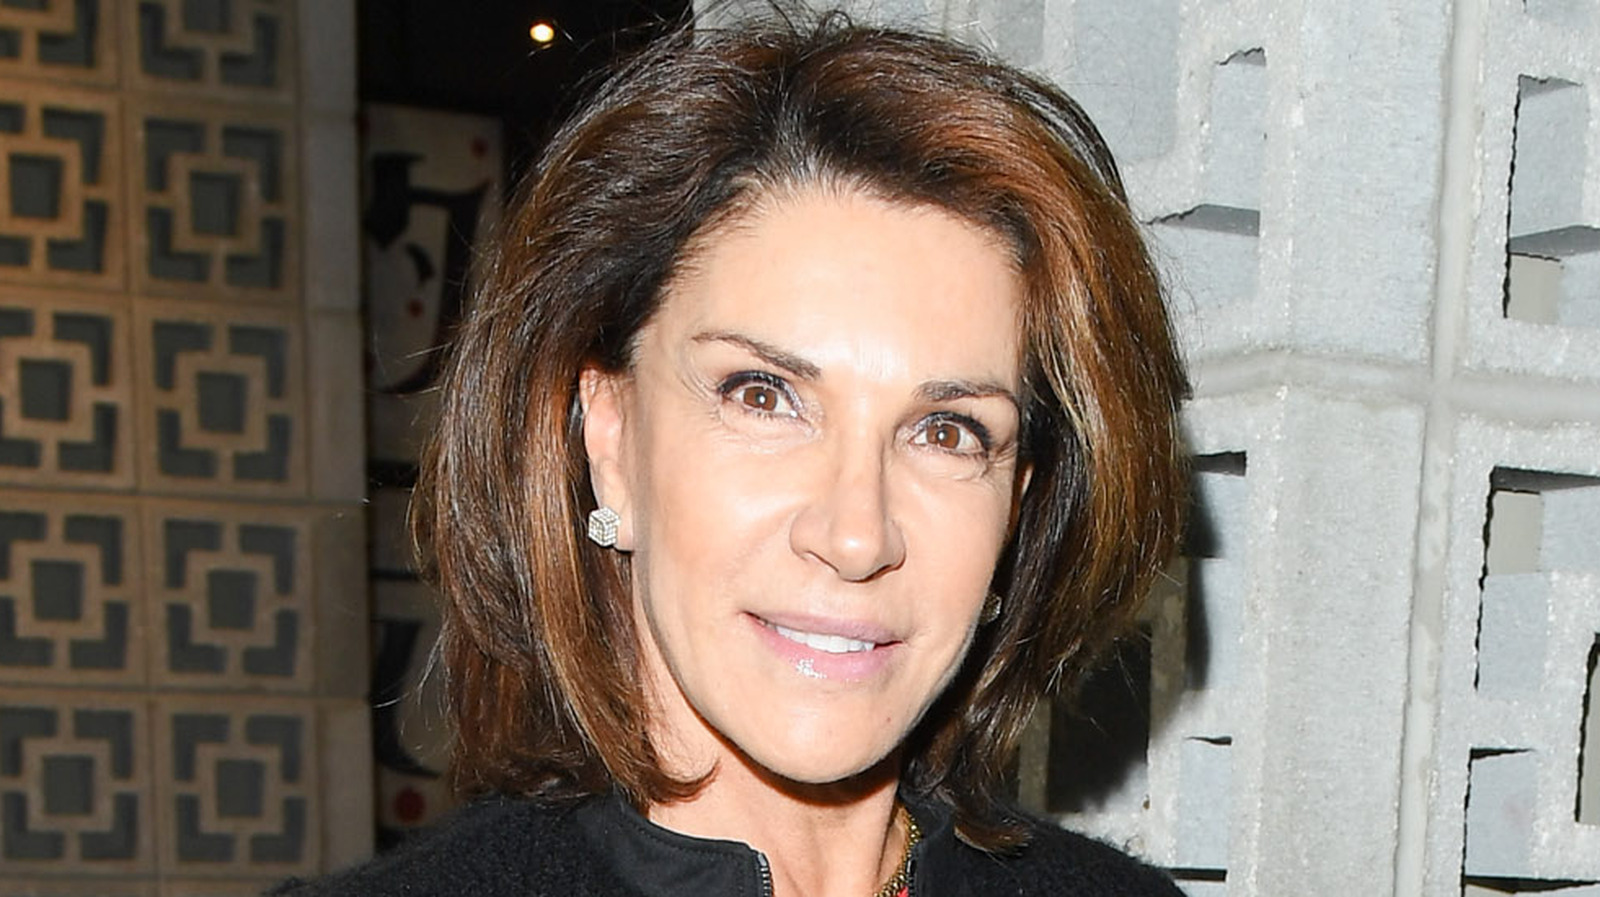 9 cases where Hilary Farr was strict with homeowners